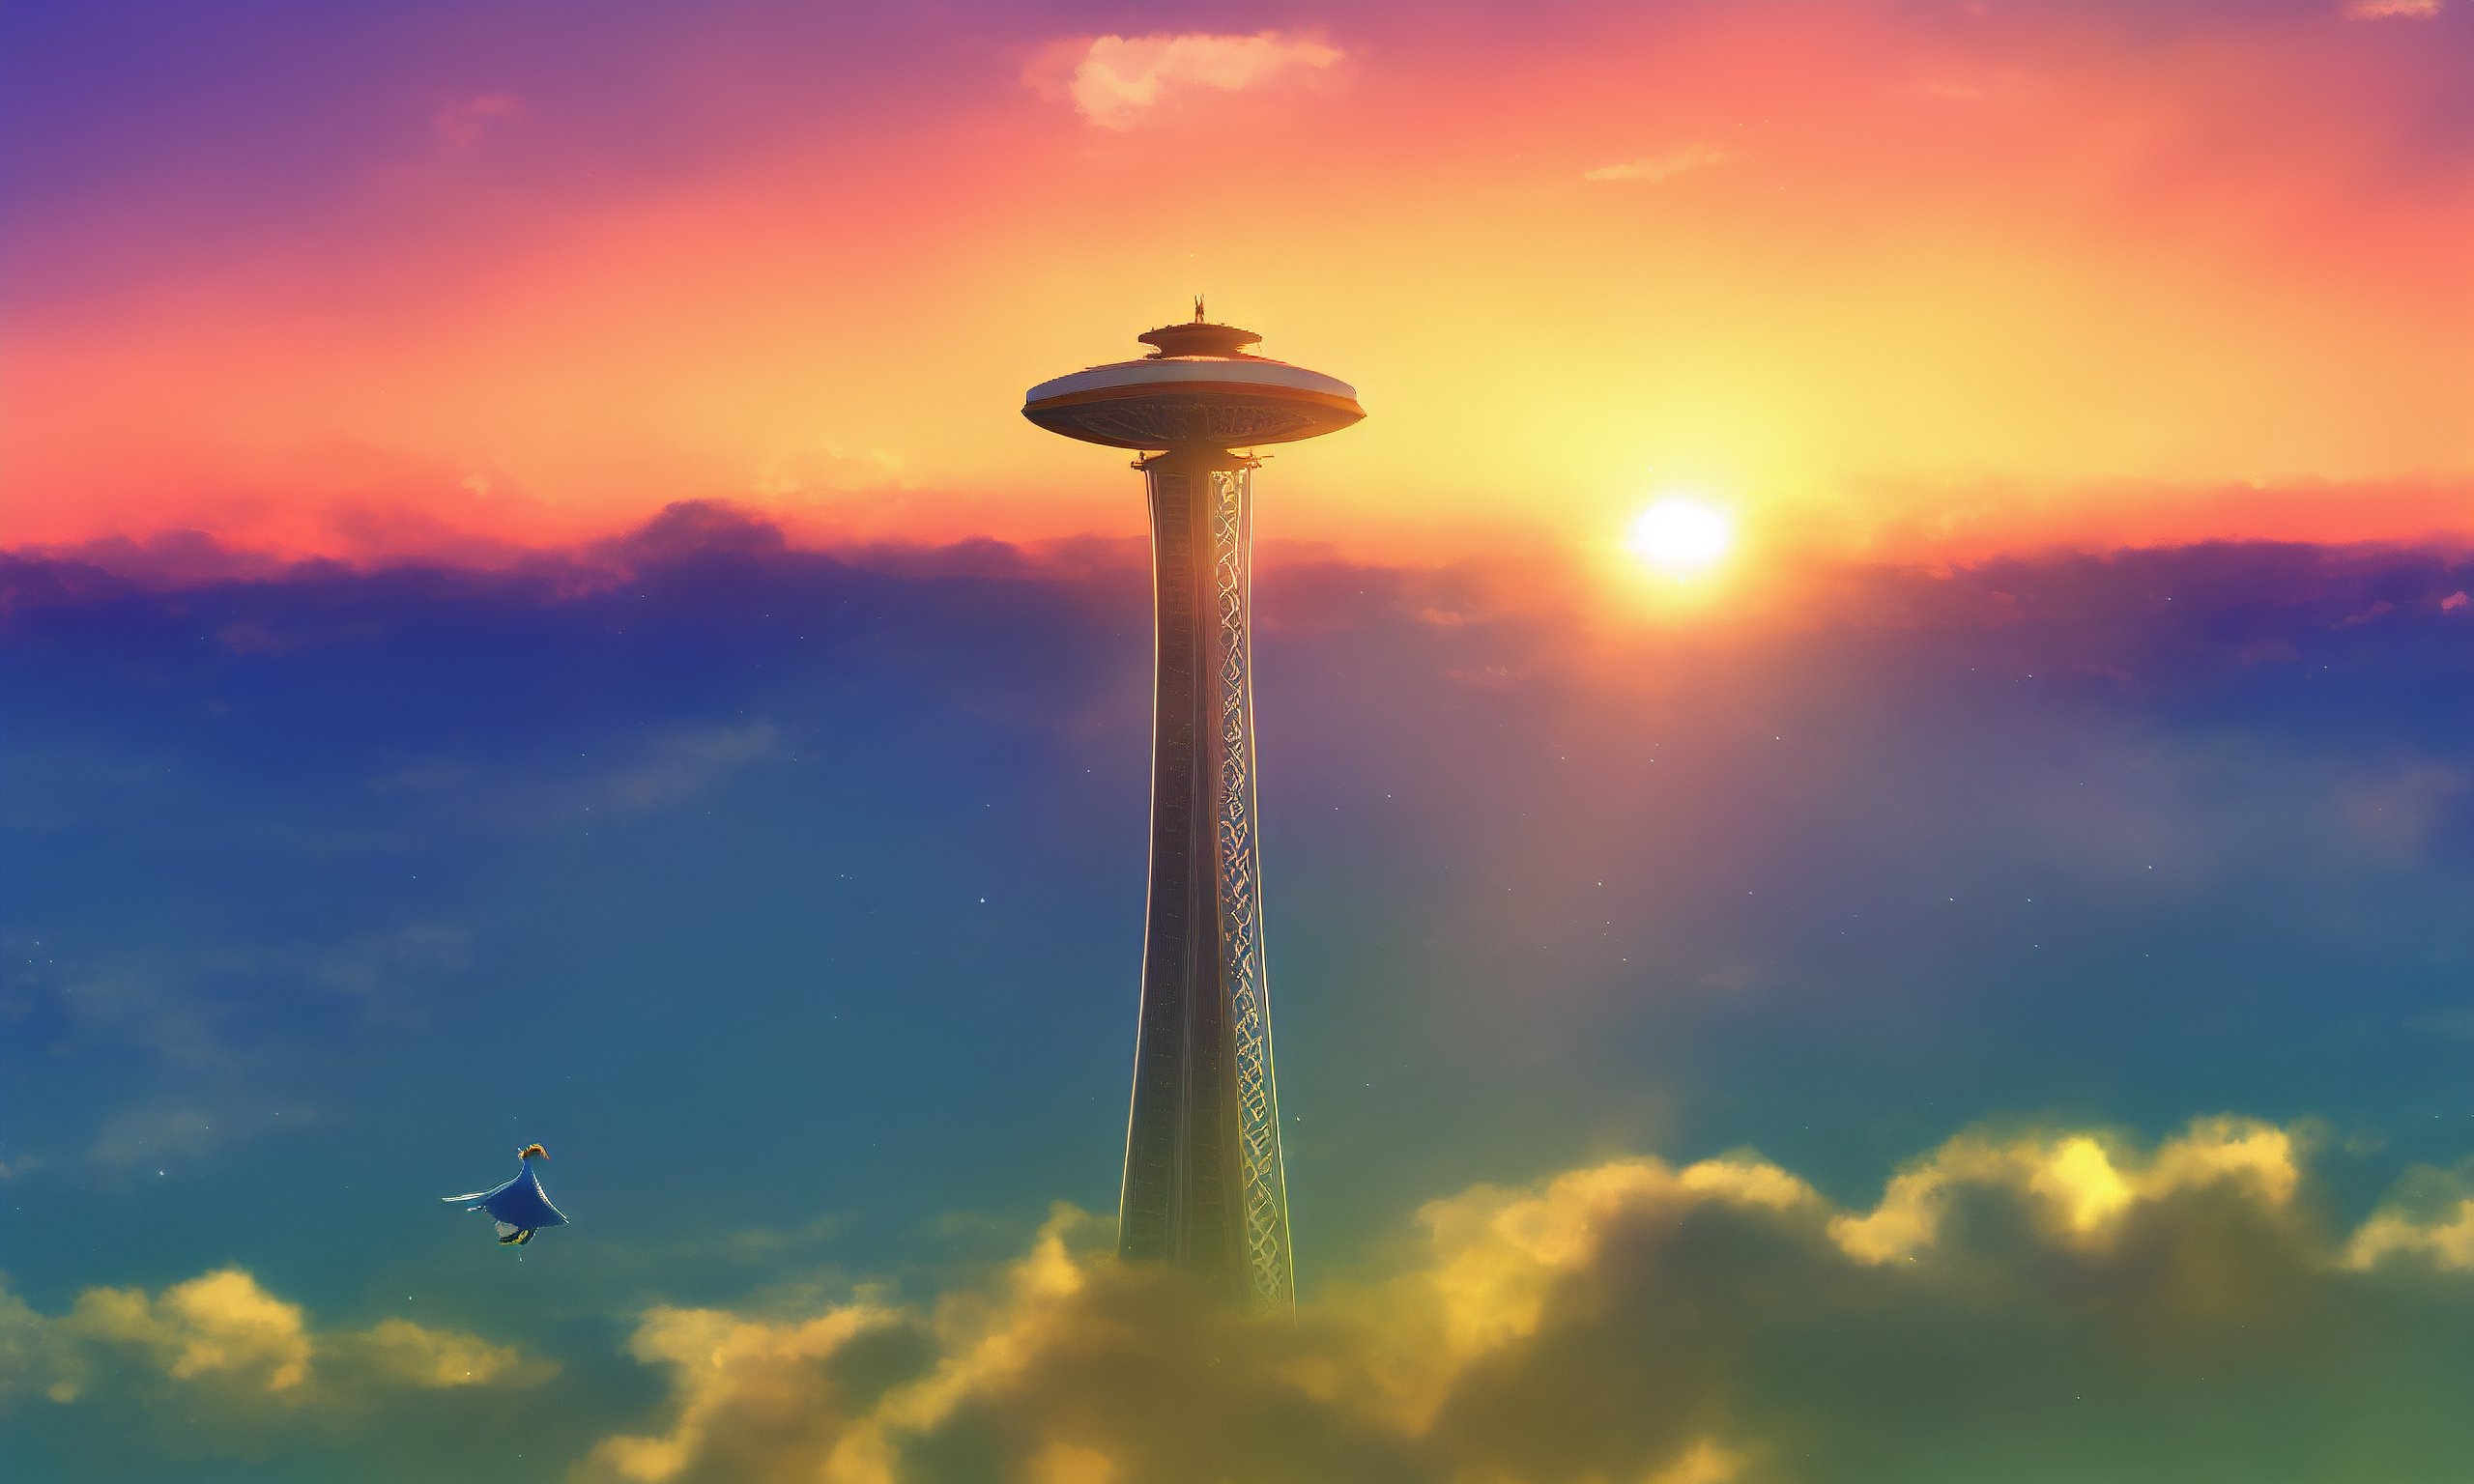 An image of light blue bird, sunset, crying, landscape, anime style, space needle, clouds, sun, genshin impact, teyvat, breath of the wild, hyrule